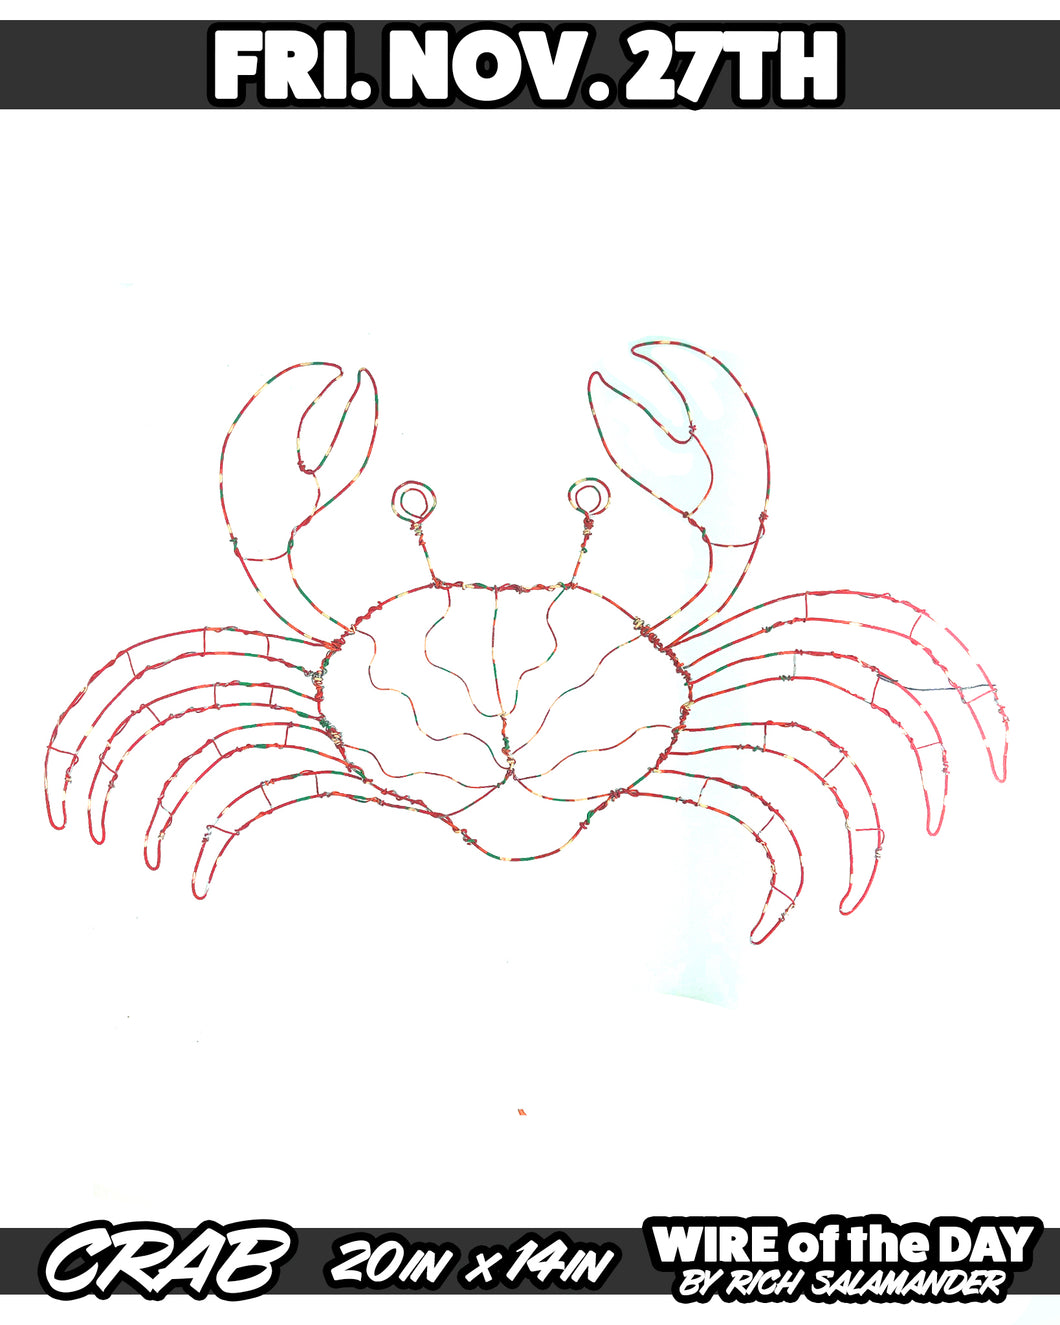 WIRE of the DAY CRAB